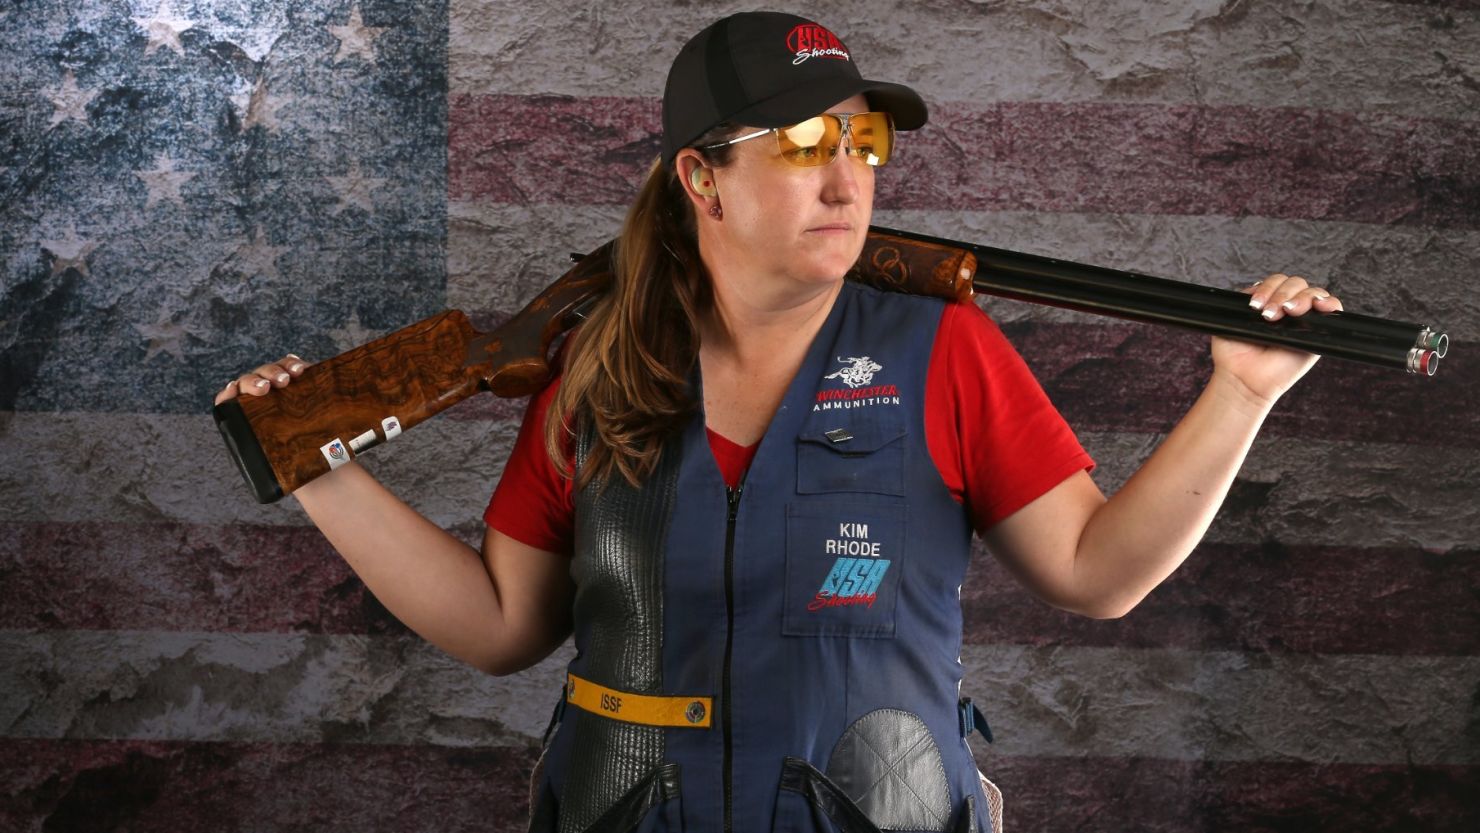 Shooter Kim Rhode poses for a portrait at the 2016 Team USA Media Summit at The Beverly Hilton Hotel on March 8, 2016 in Beverly Hills, California.